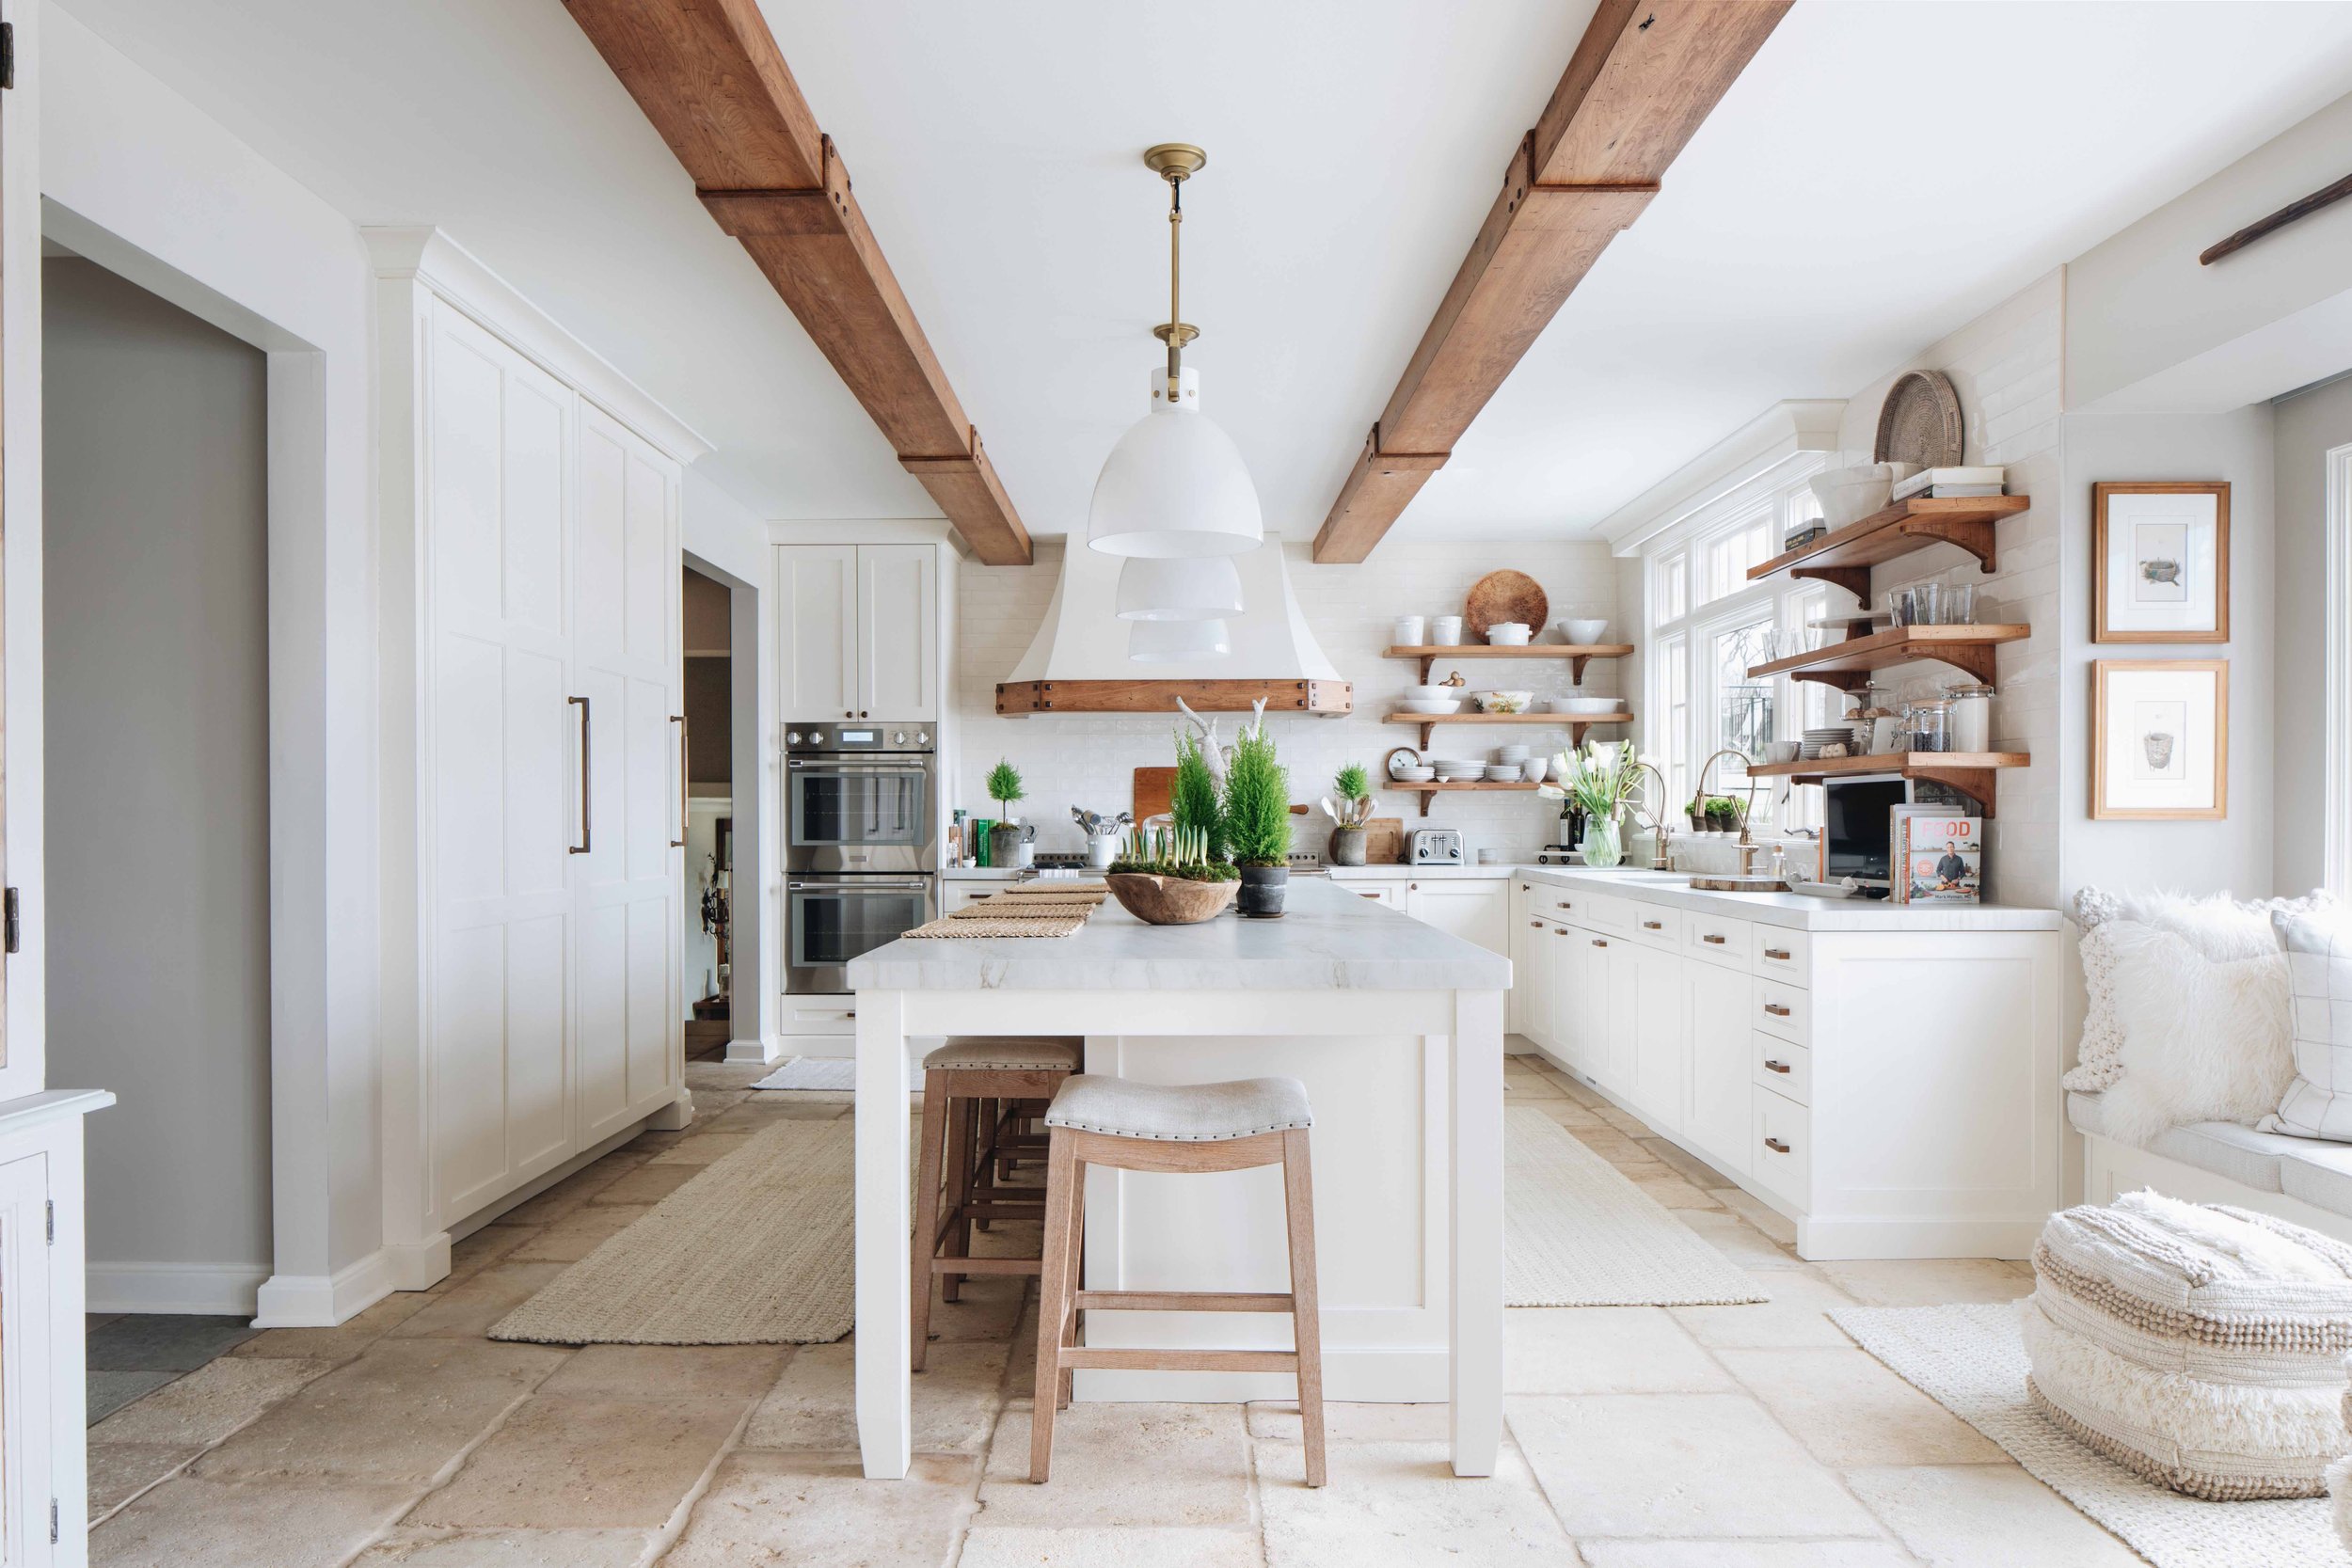 Harmonious Kitchen with white cabinetry and warm wood tones